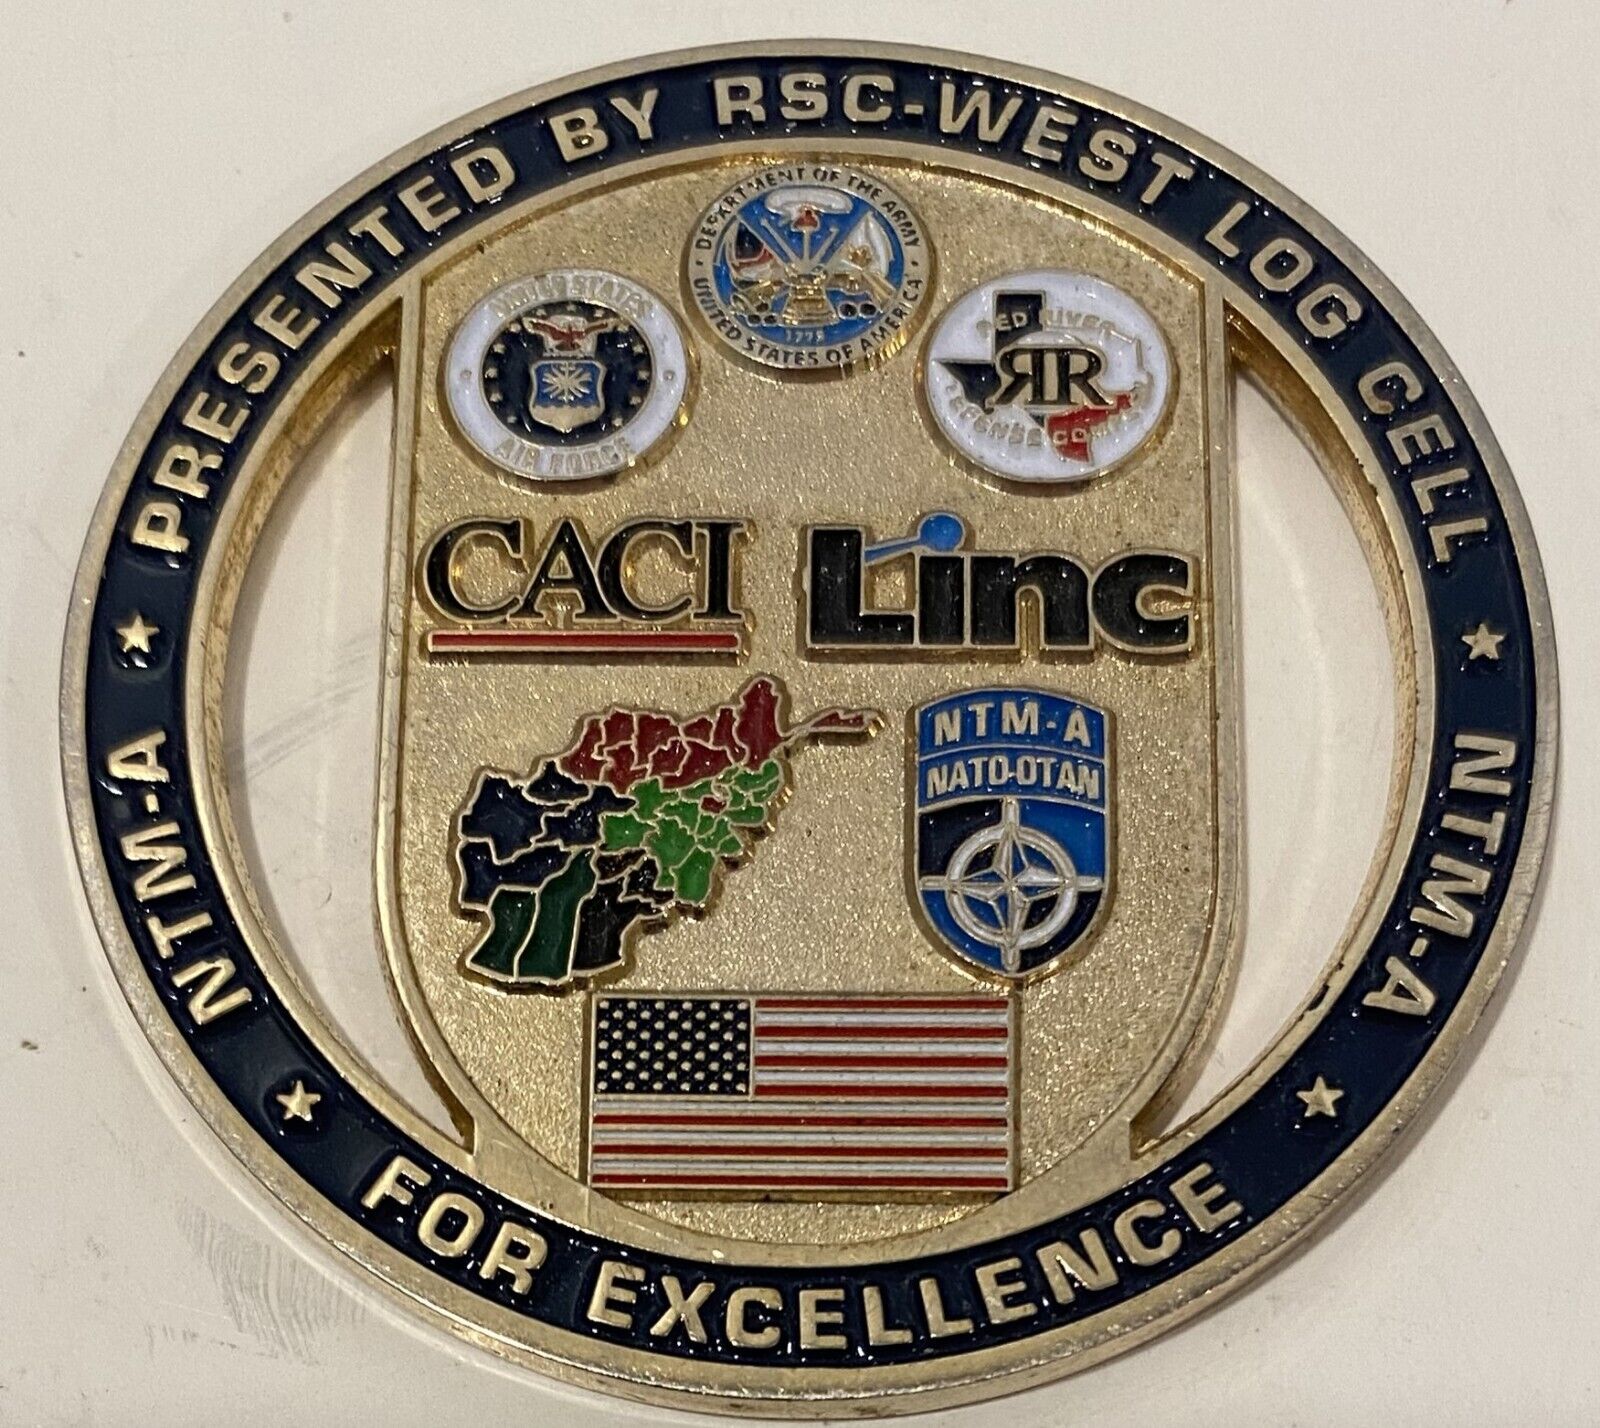 NTM-A (Nato Training Mission -Afghanistan) RSC-West Log Cell Challenge Coin